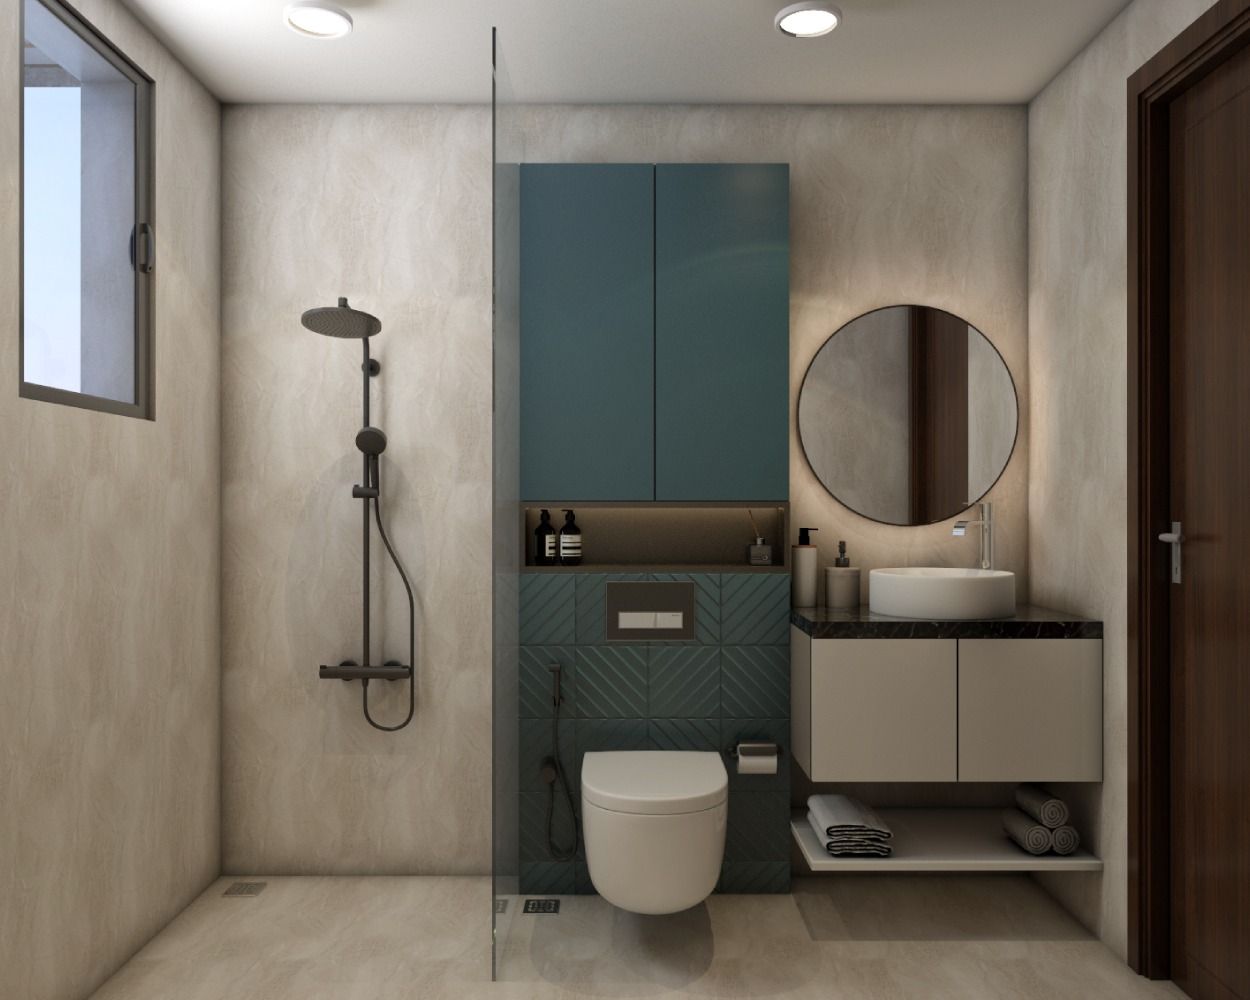 Contemporary Small Bathroom Idea With A Separate Shower Unit